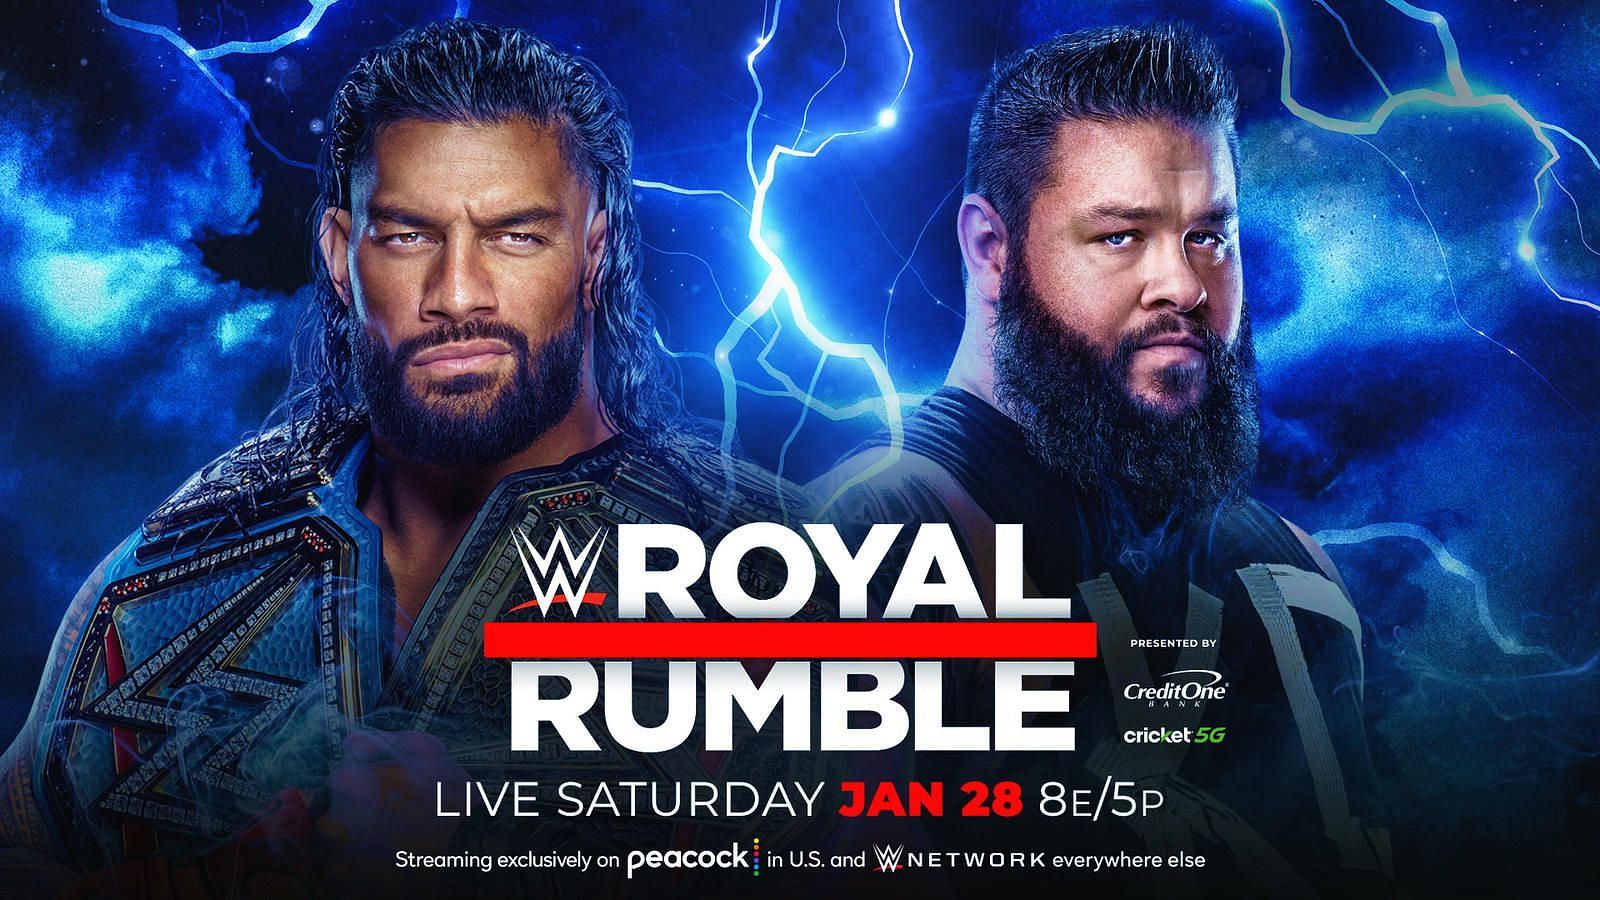 Roman Reigns defends the Undisputed Universal title against Kevin Owens at the Royal Rumble